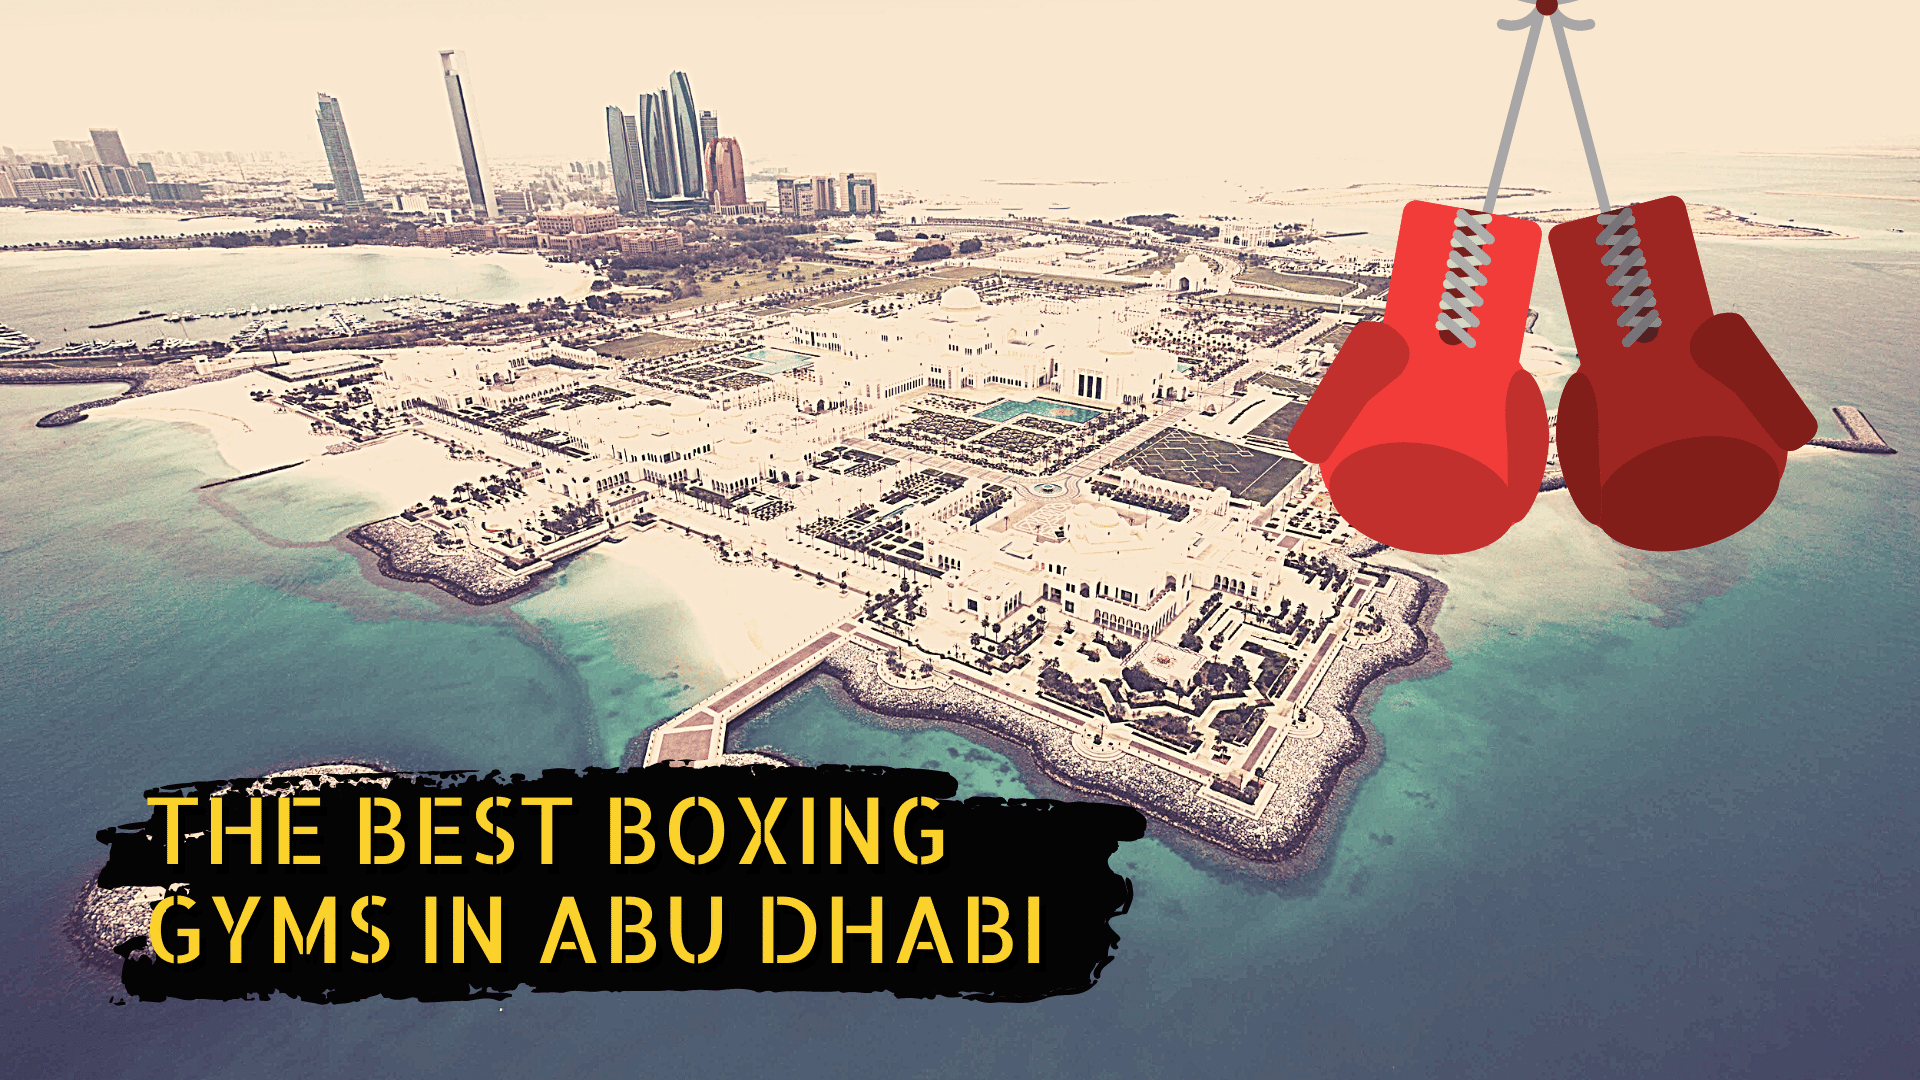 Abu Dhabi and boxing gloves